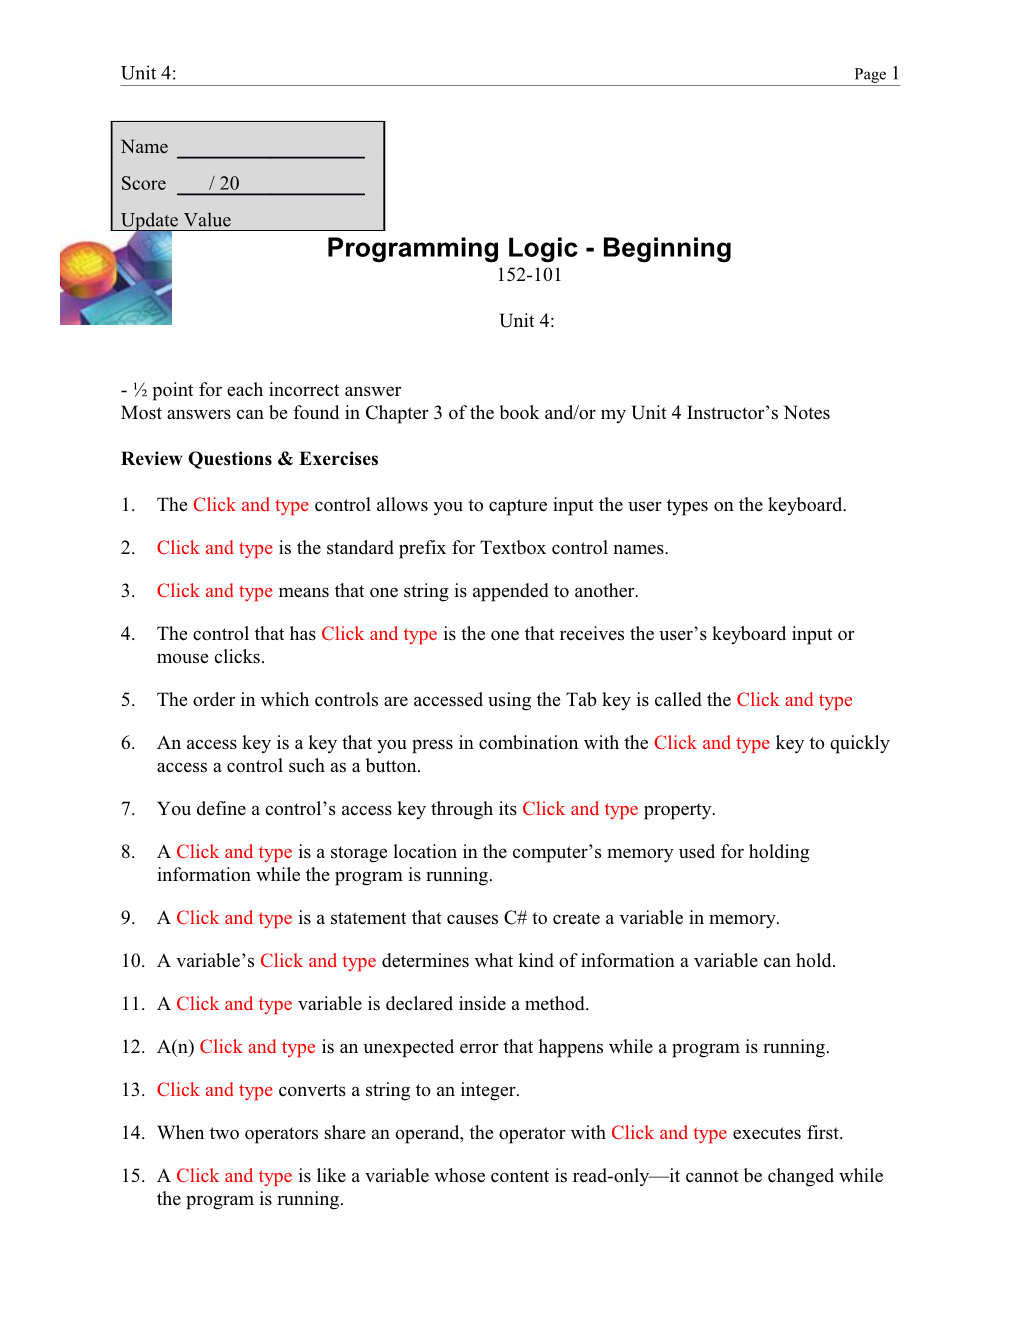 Unit 4: Sequential Processing Page 6